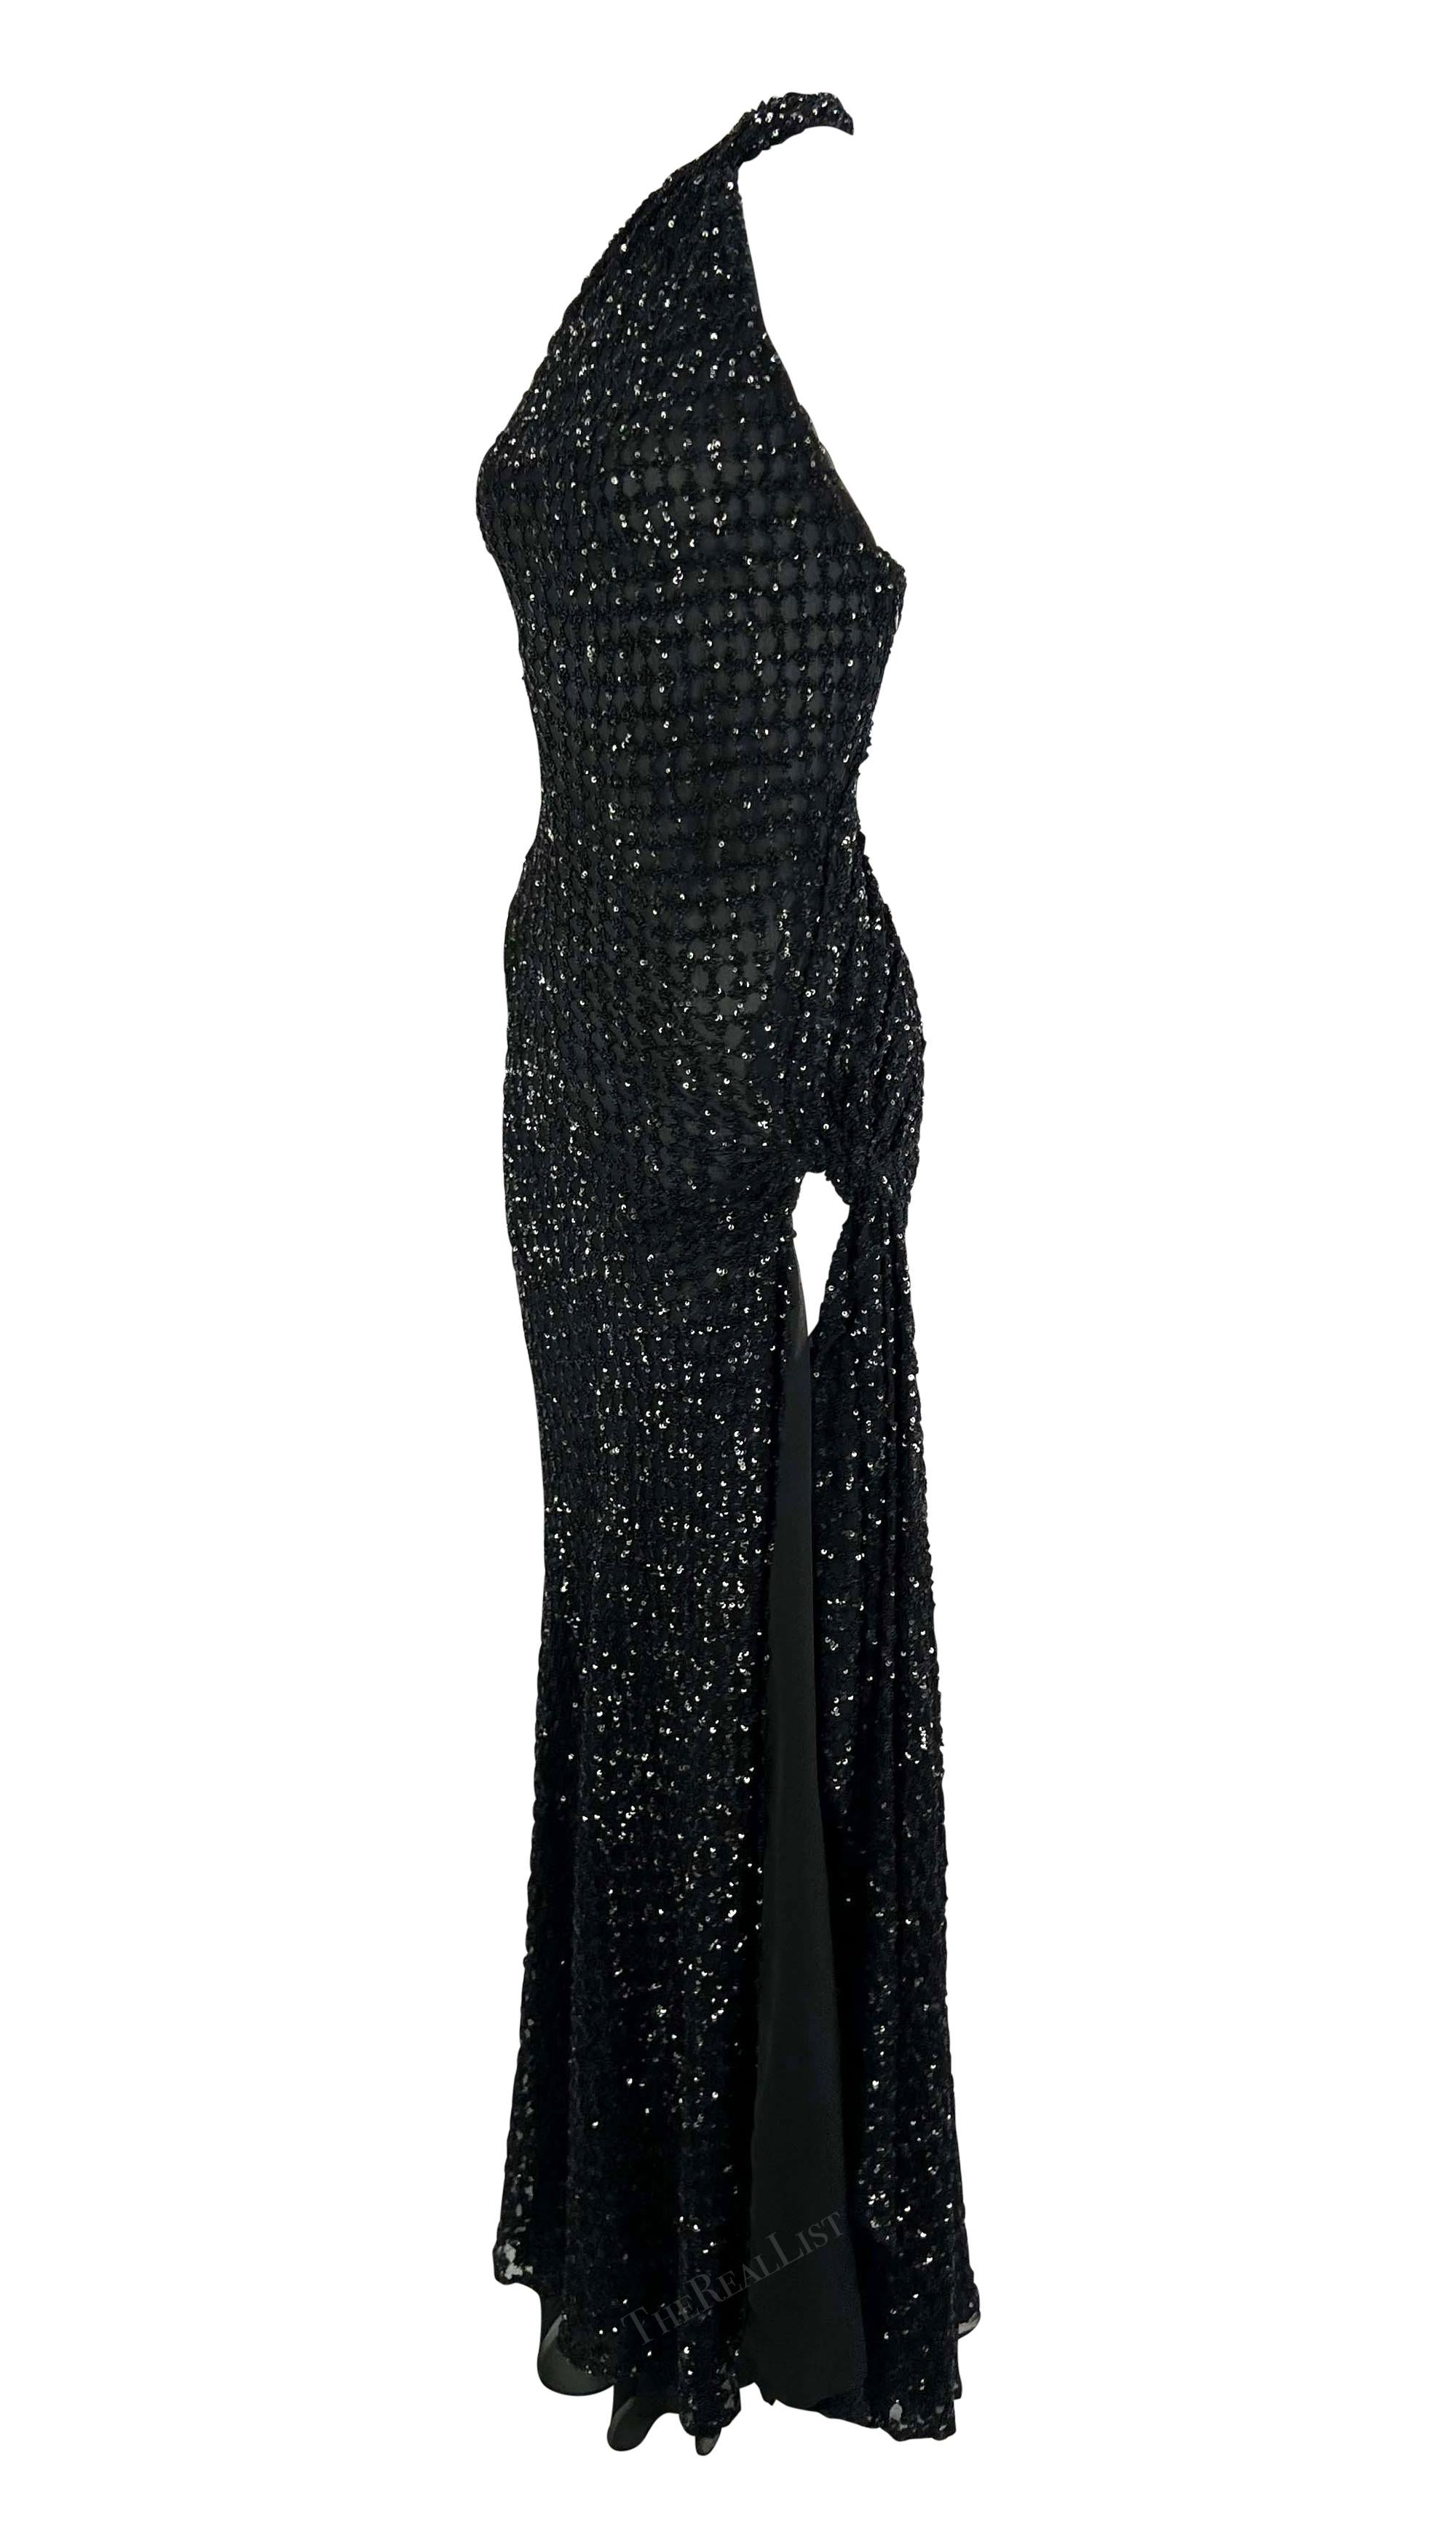 F/W 2002 Gianni Versace by Donatella Runway Ad Black Sequin Sheer Slit Gown  For Sale 9